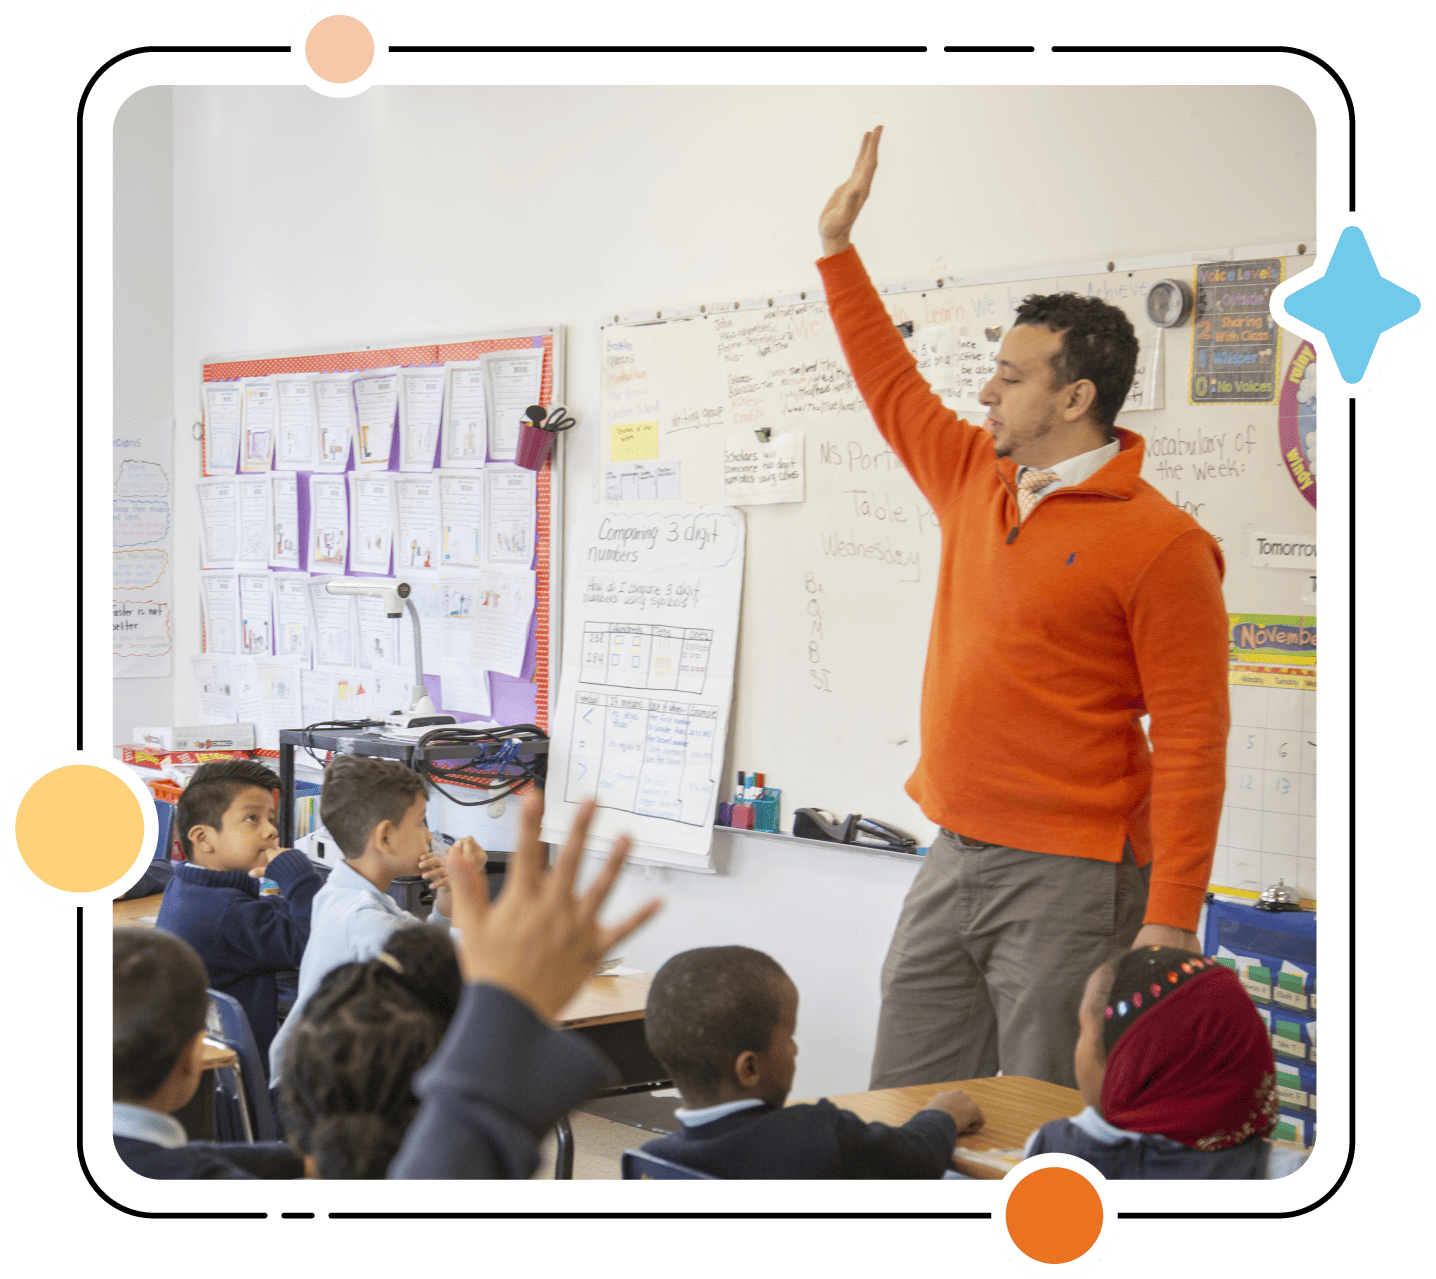 Male teacher in an orange sweater teaching a biliteracy program to a class of elementary students, with multiple students raising their hands to answer a question.